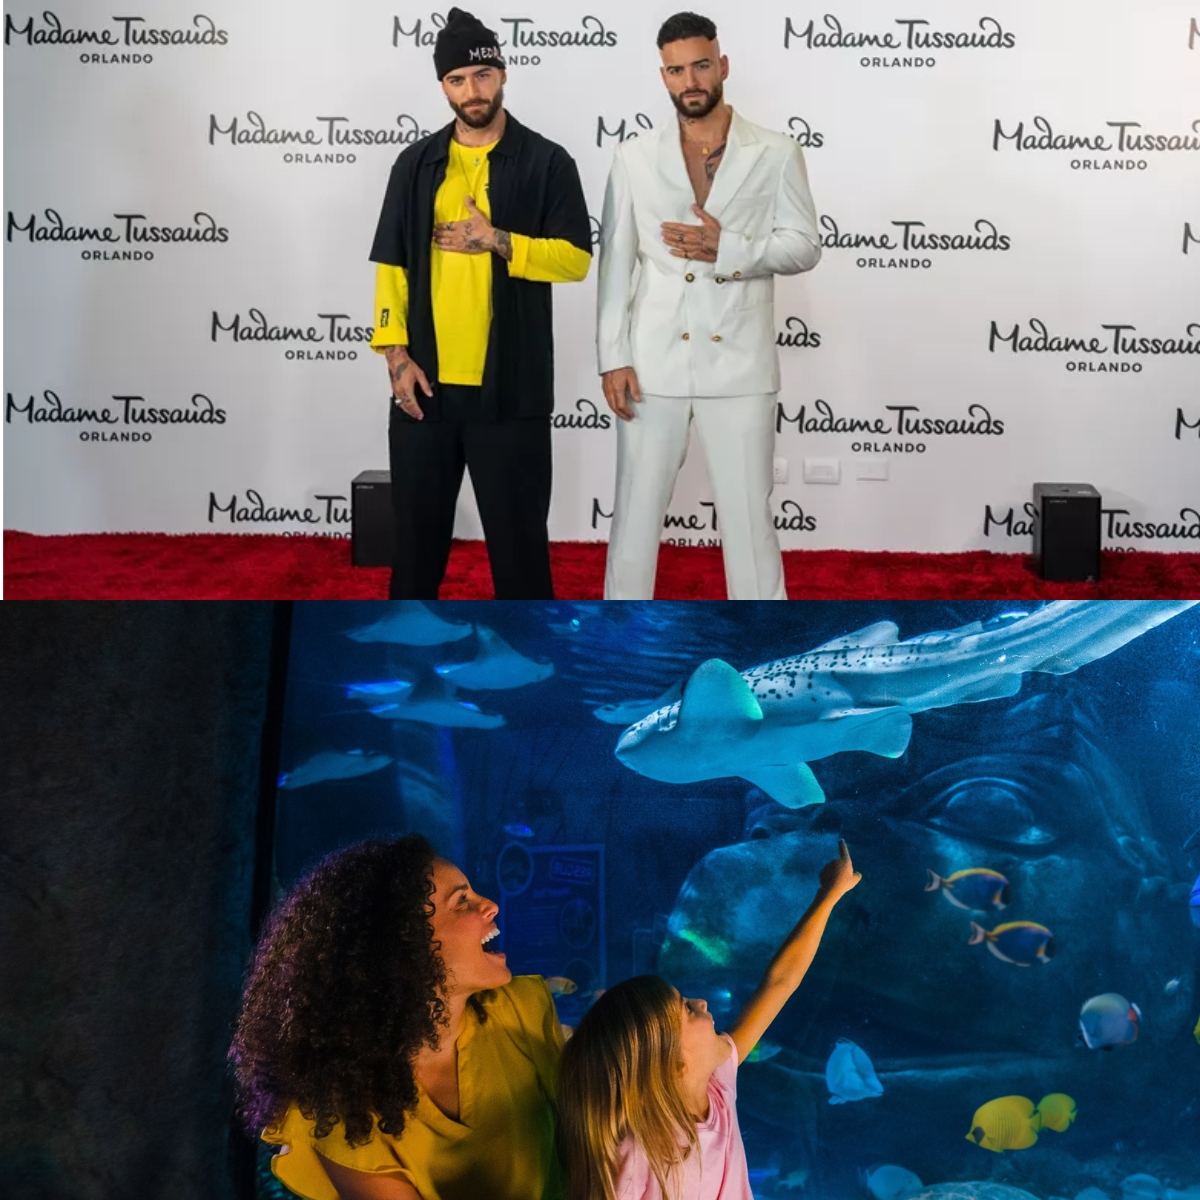 Collage of images. Celebrity with wax figure at Madame Tussauds and family admiring shark at SEA LIFE Aquarium.